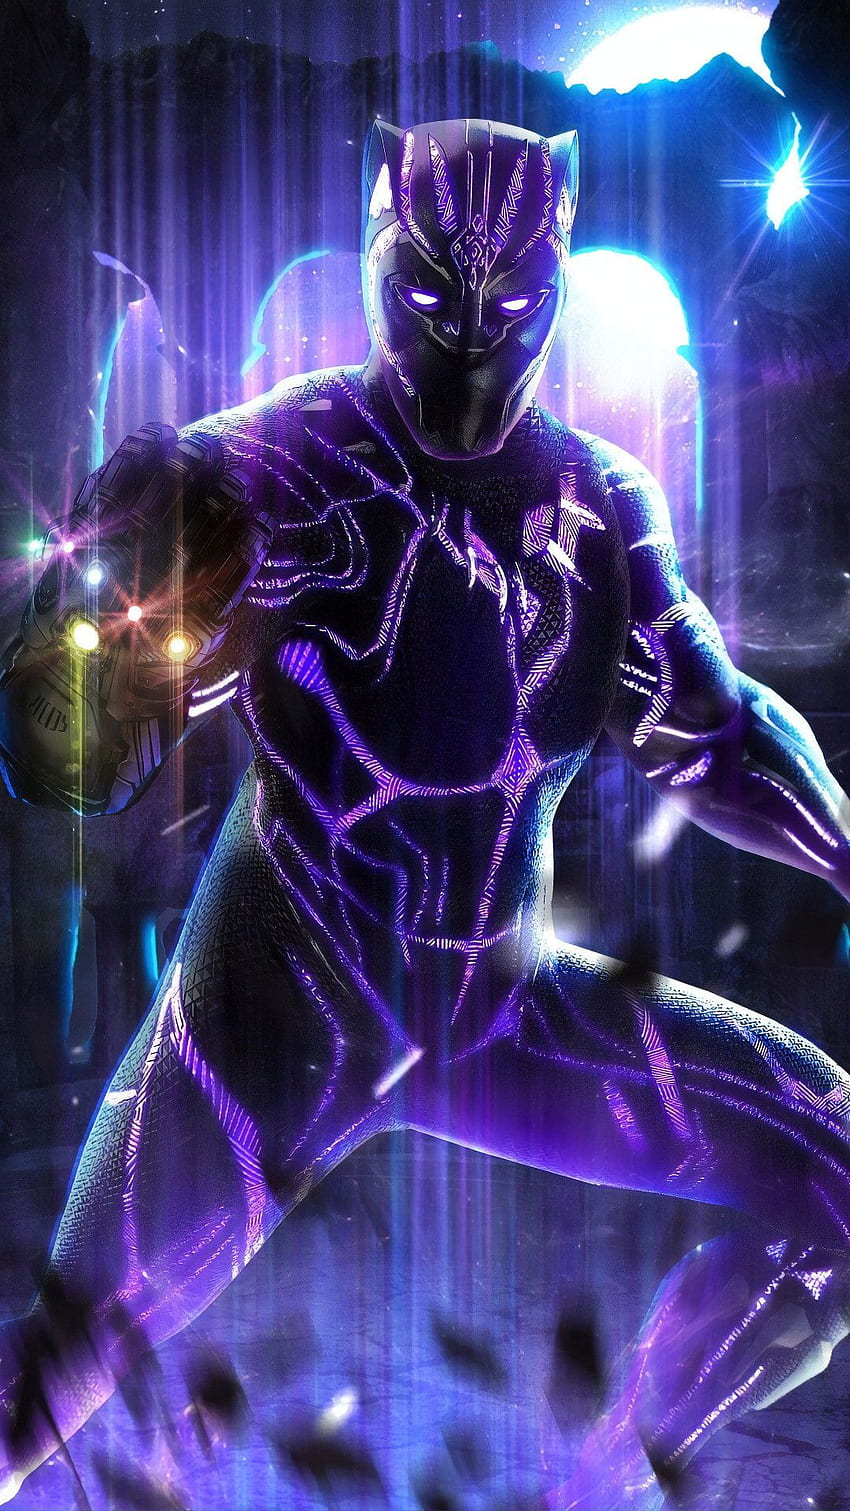 Black Panther With Infinity Gauntlet Mobile iPhone, Android, Samsung, Pixel, X in 2020. Black panther marvel, Marvel comics , Marvel superhero posters, Black Panther Endgame HD phone wallpaper